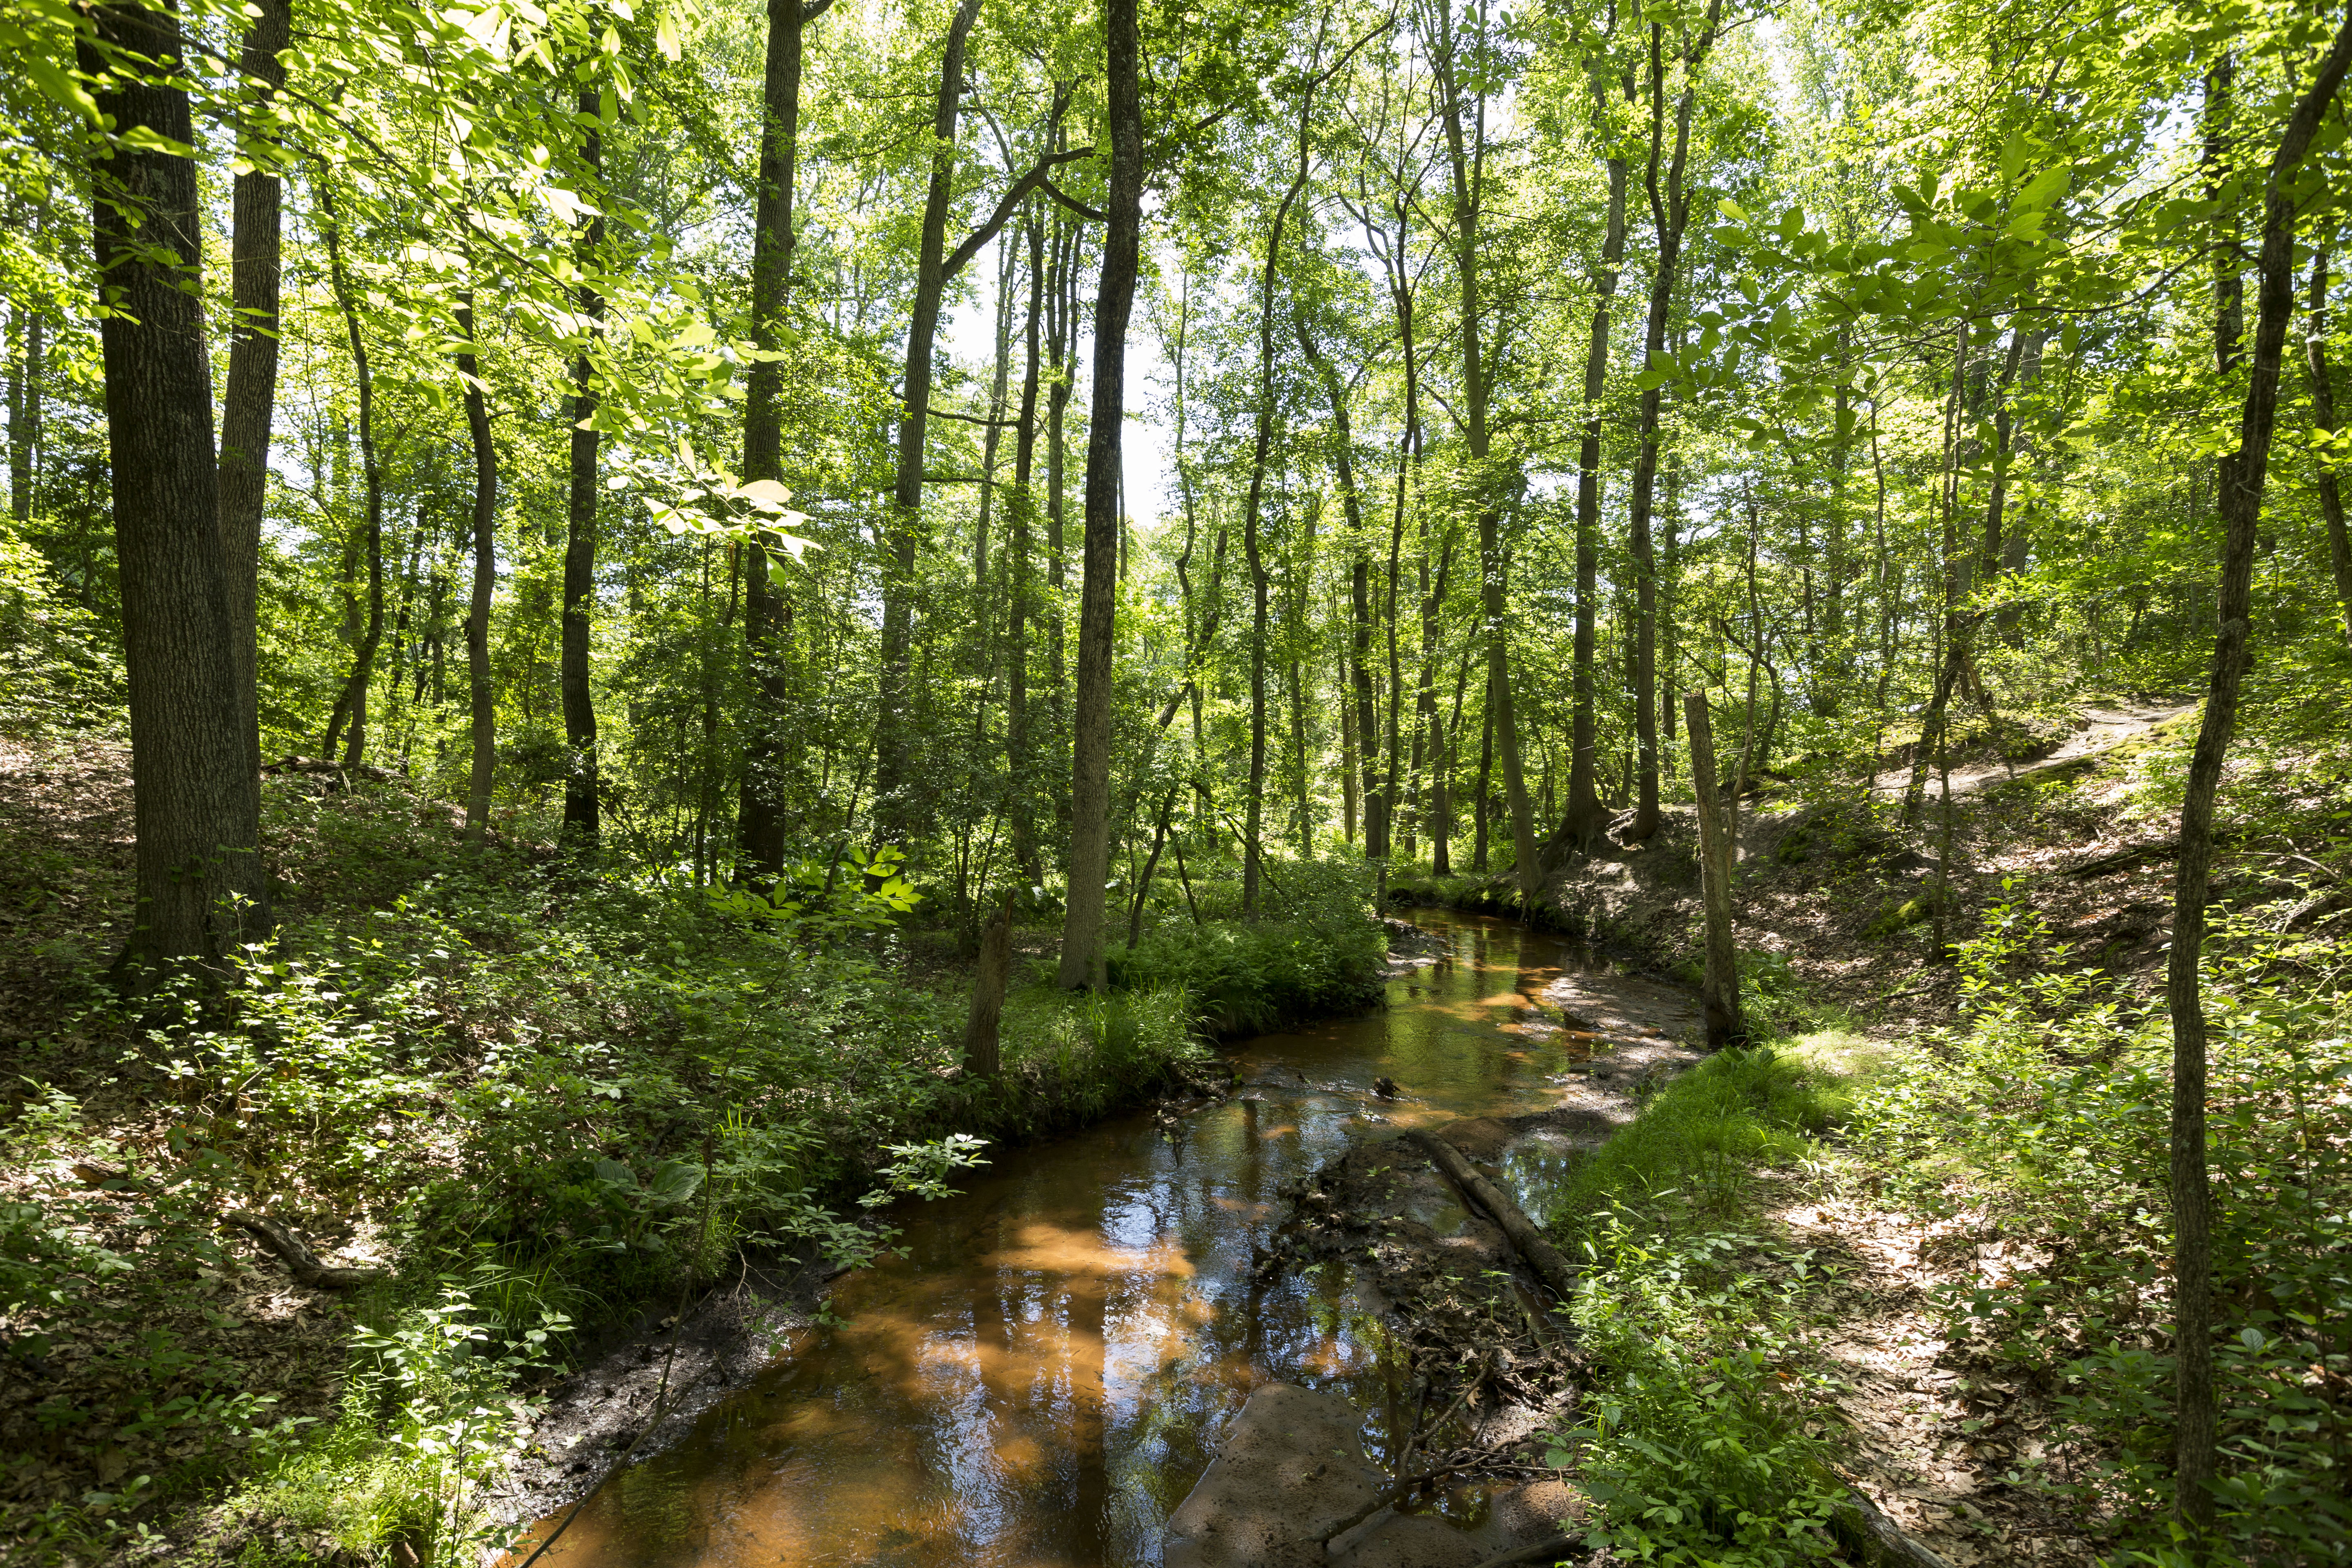 Creek winding through wooded area